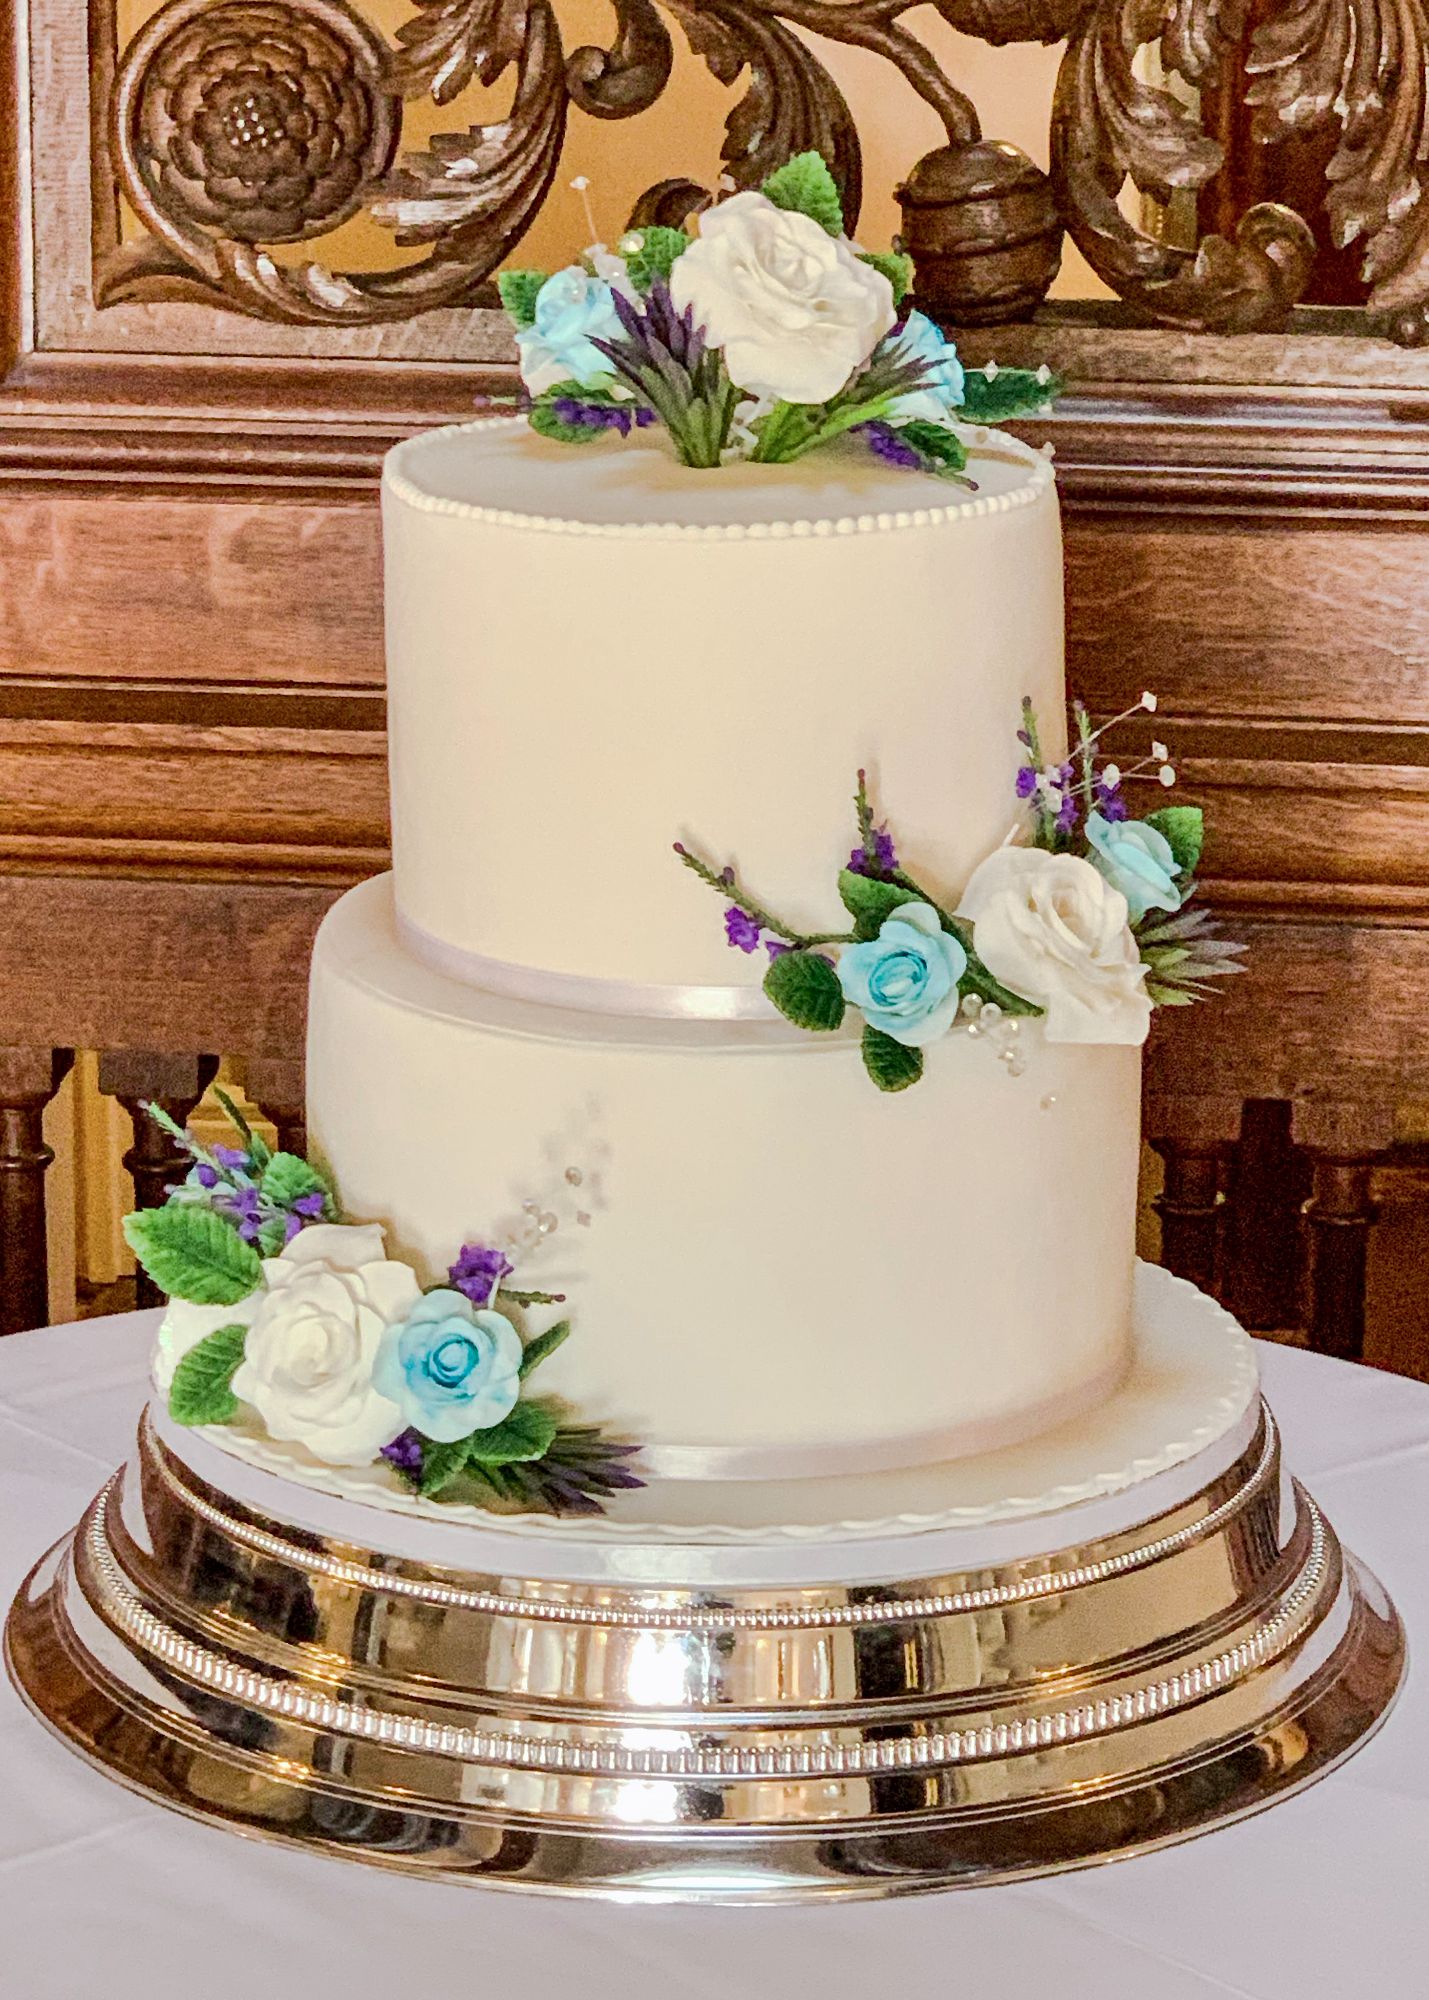 blue and white rose wedding cake complete